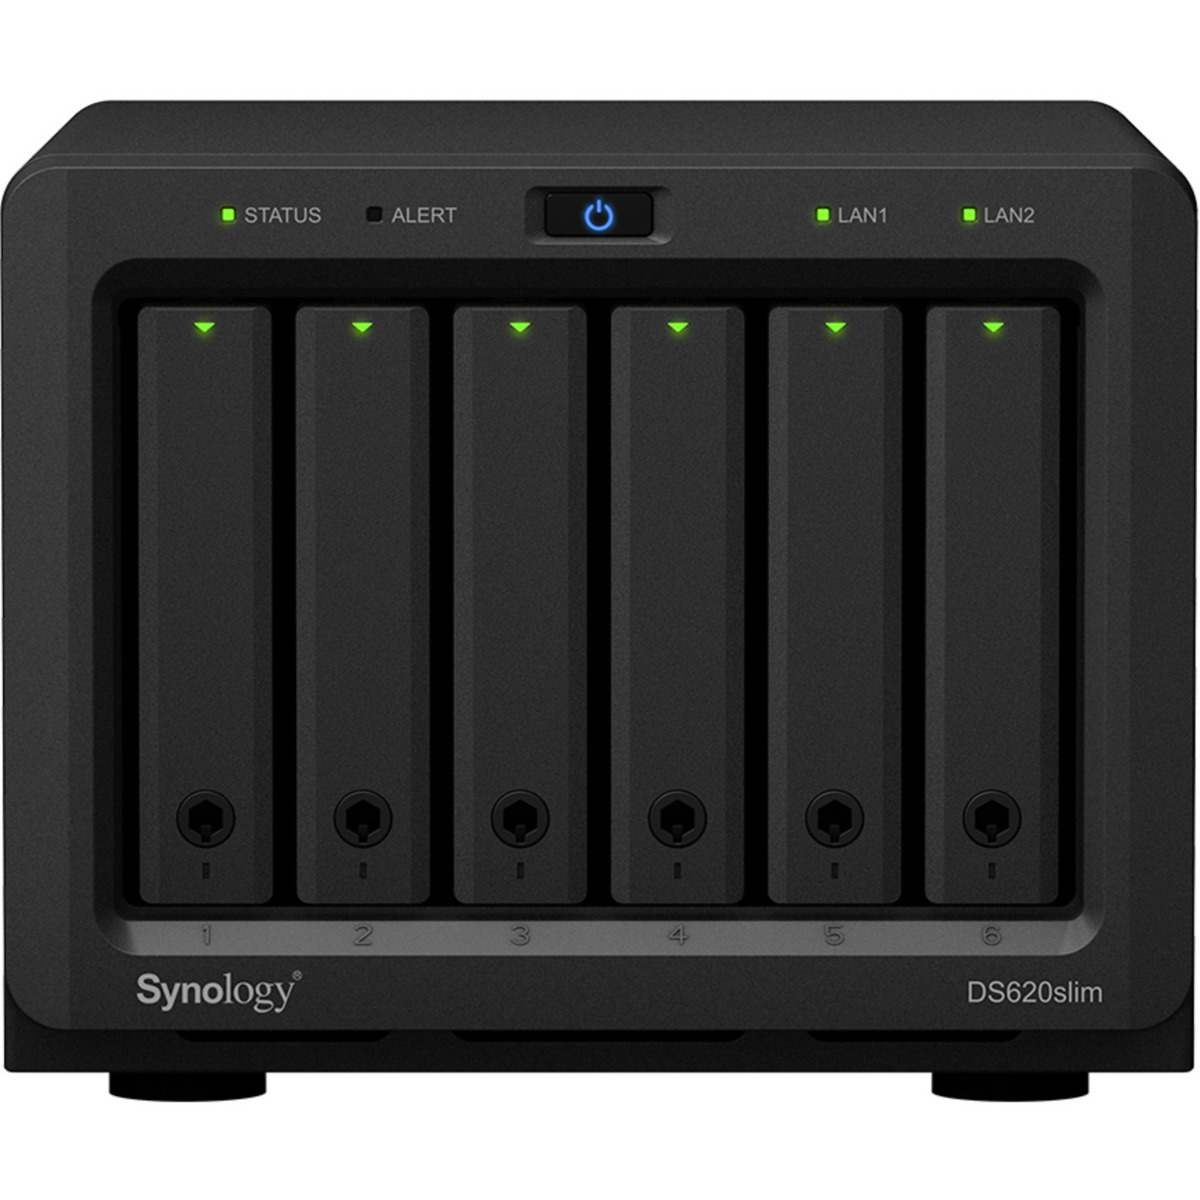 Synology DiskStation DS620slim 8tb 6-Bay Desktop Multimedia / Power User / Business NAS - Network Attached Storage Device 4x2tb Samsung 870 QVO MZ-77Q2T0 2.5 560/530MB/s SATA 6Gb/s SSD CONSUMER Class Drives Installed - Burn-In Tested - FREE RAM UPGRADE DiskStation DS620slim